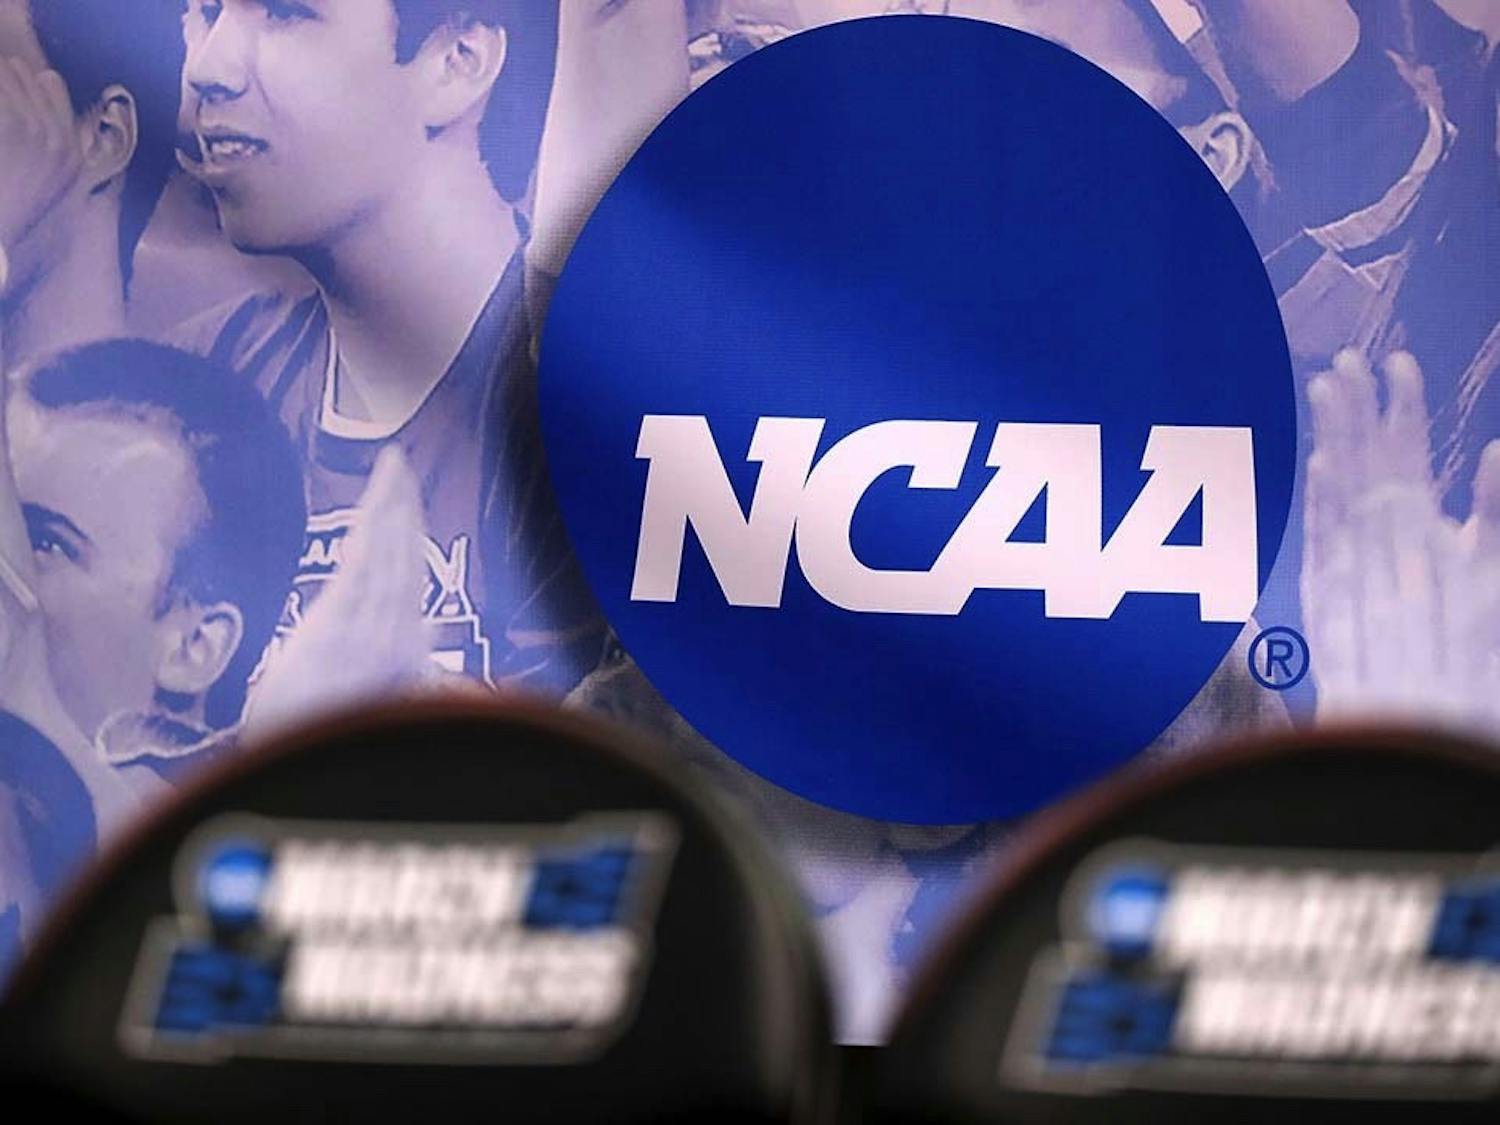 The NCAA logo during the NCAA Men’s Basketball Tournament in 2017. The NCAA is changing its rules to allow players within the organization to earn money from their name, image and likeness (NIL).